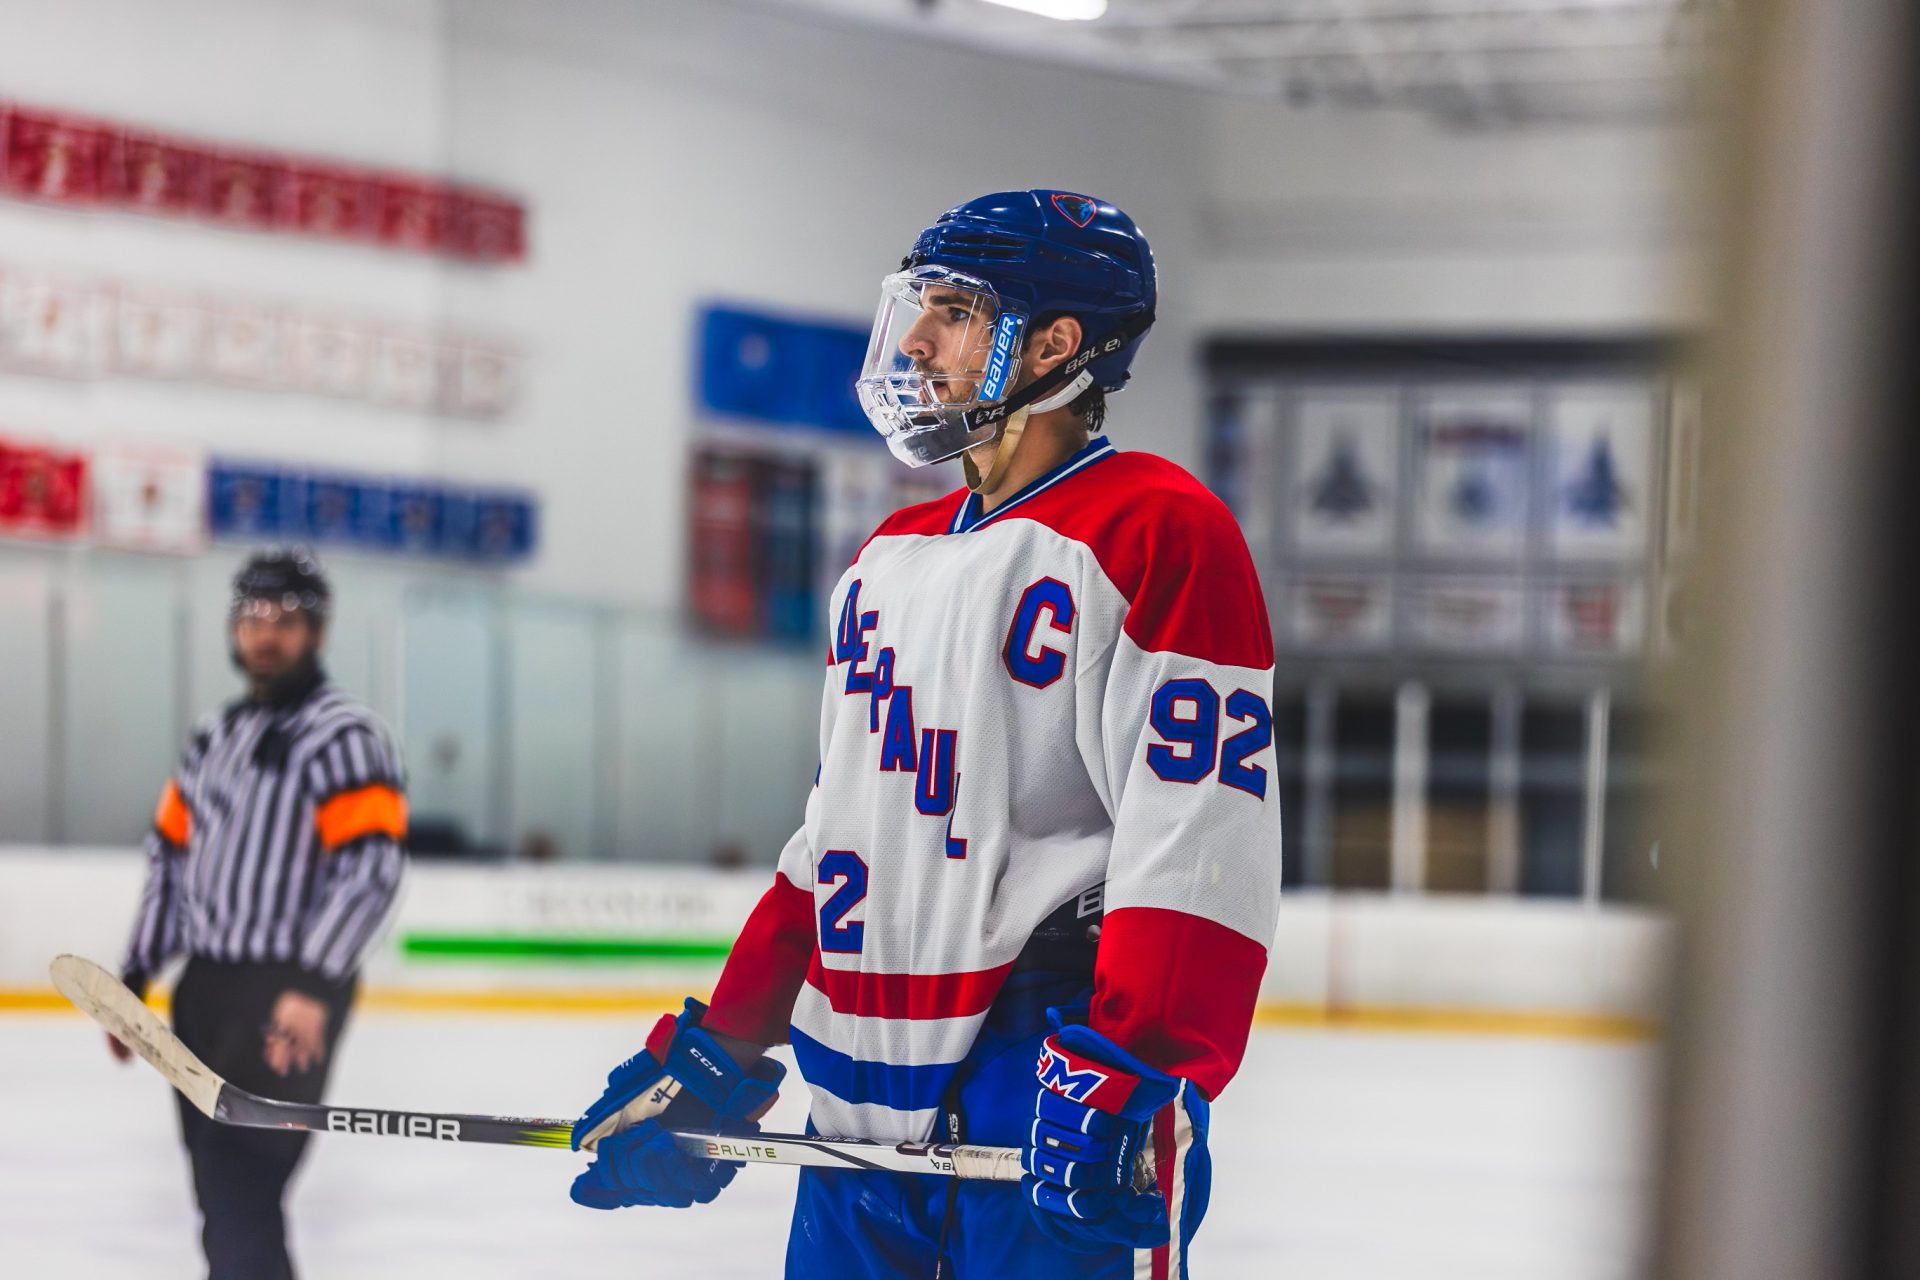 Brock Ash, senior and captain of the DePaul club hockey team, awaits play at a Sept. 29 home game in Chicago versus Davenport.  Ash has played an important role in securing the team’s first regional qualification in nearly 15 years.